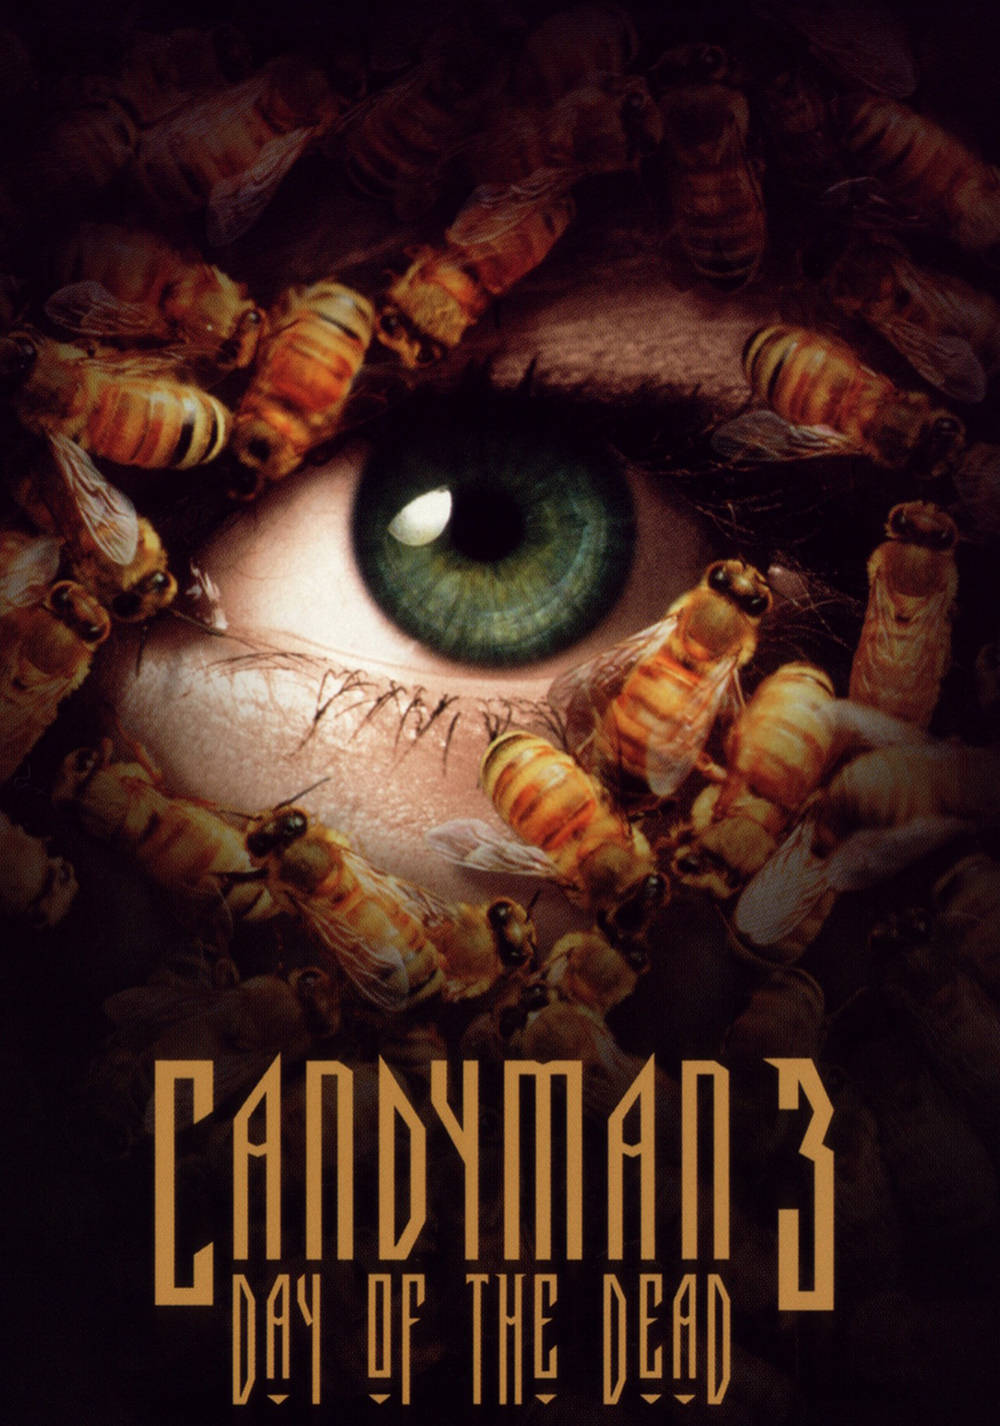 Candyman 3 Day Of The Dead Wallpaper